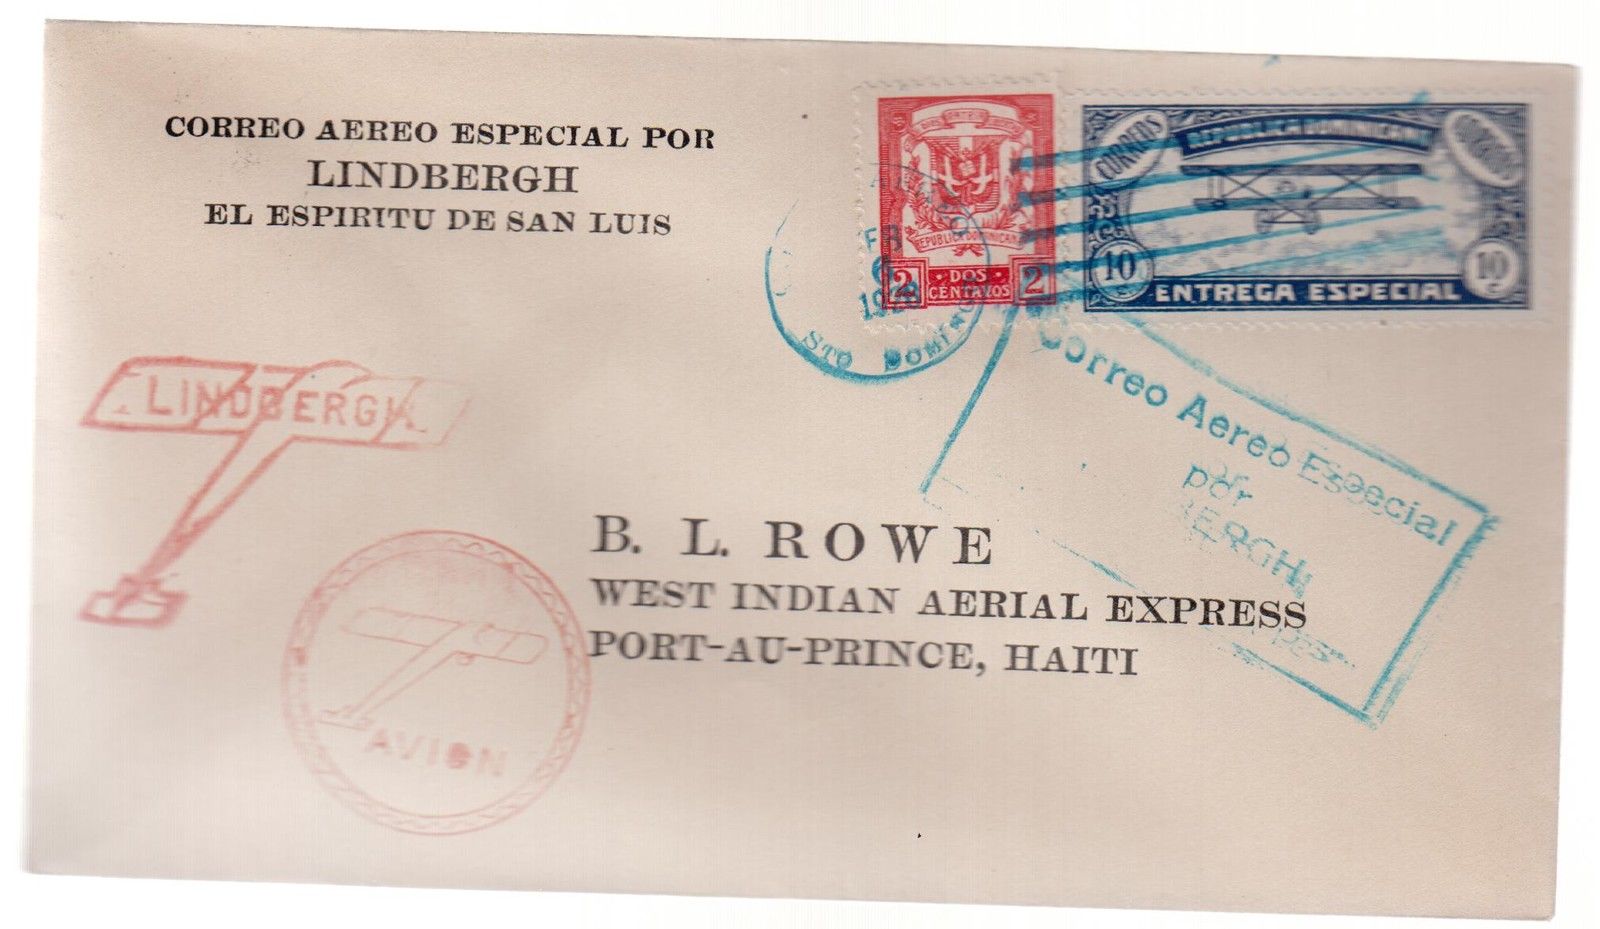 1928 Dominican Republic First Flight Cover to Haiti Lindberg Special